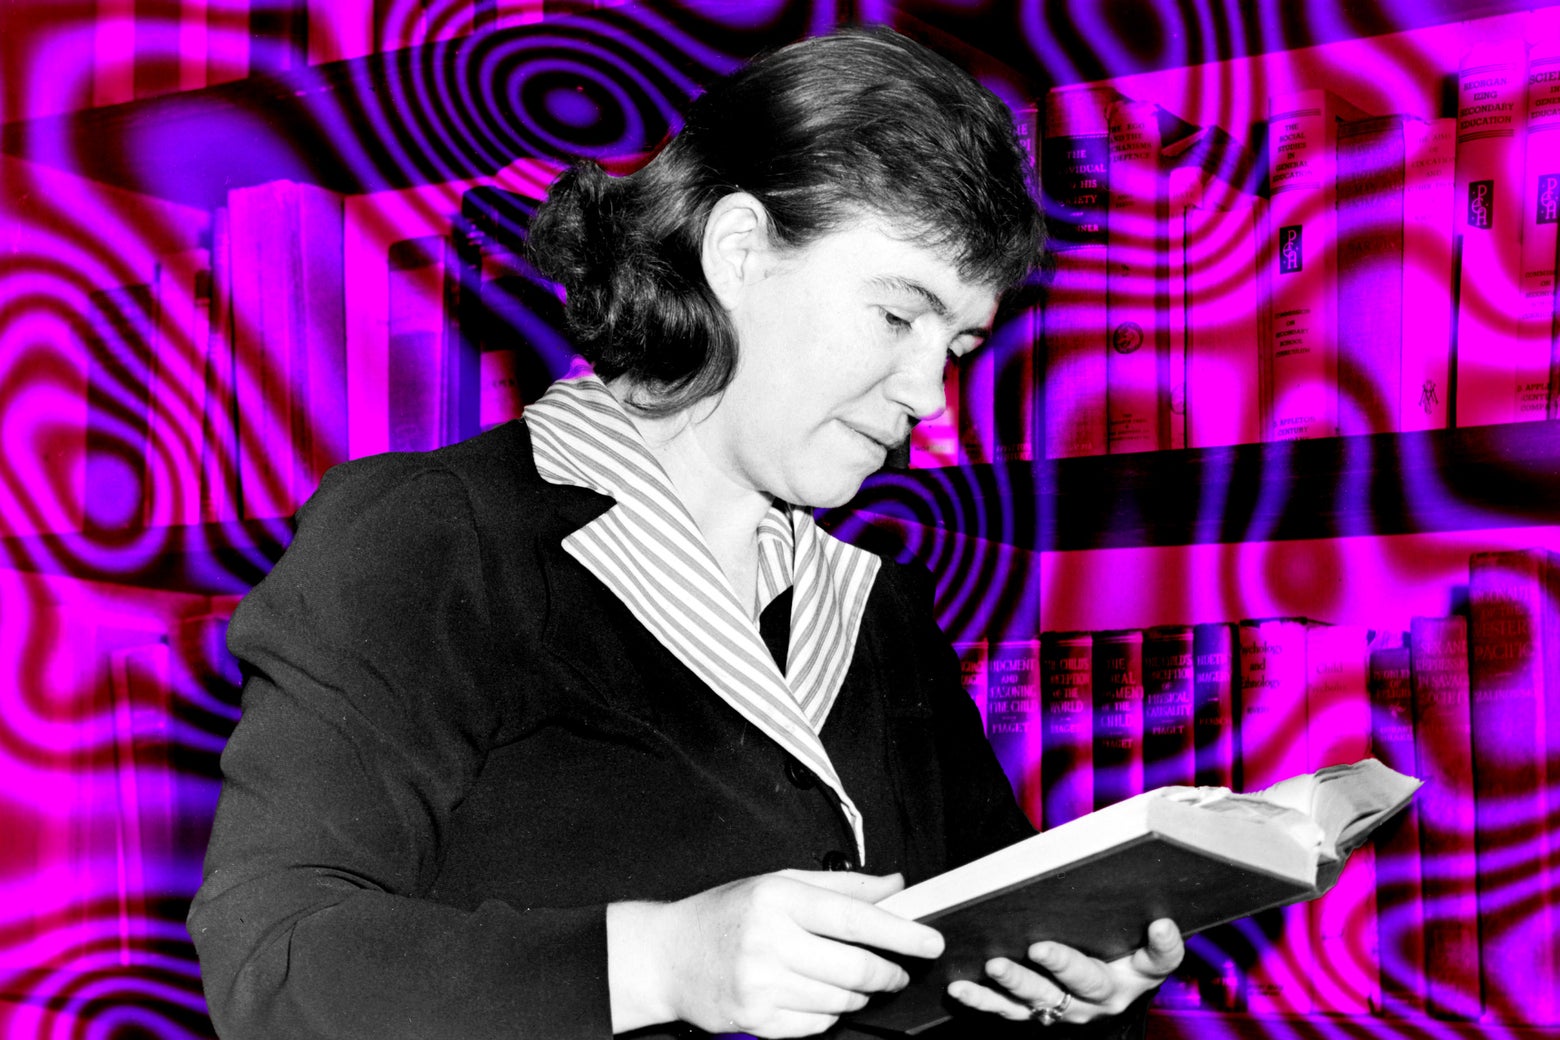 Margaret Mead was among the most famous scientists of the 20th century. Despite this, however, her role in the early history of psychedelic rese